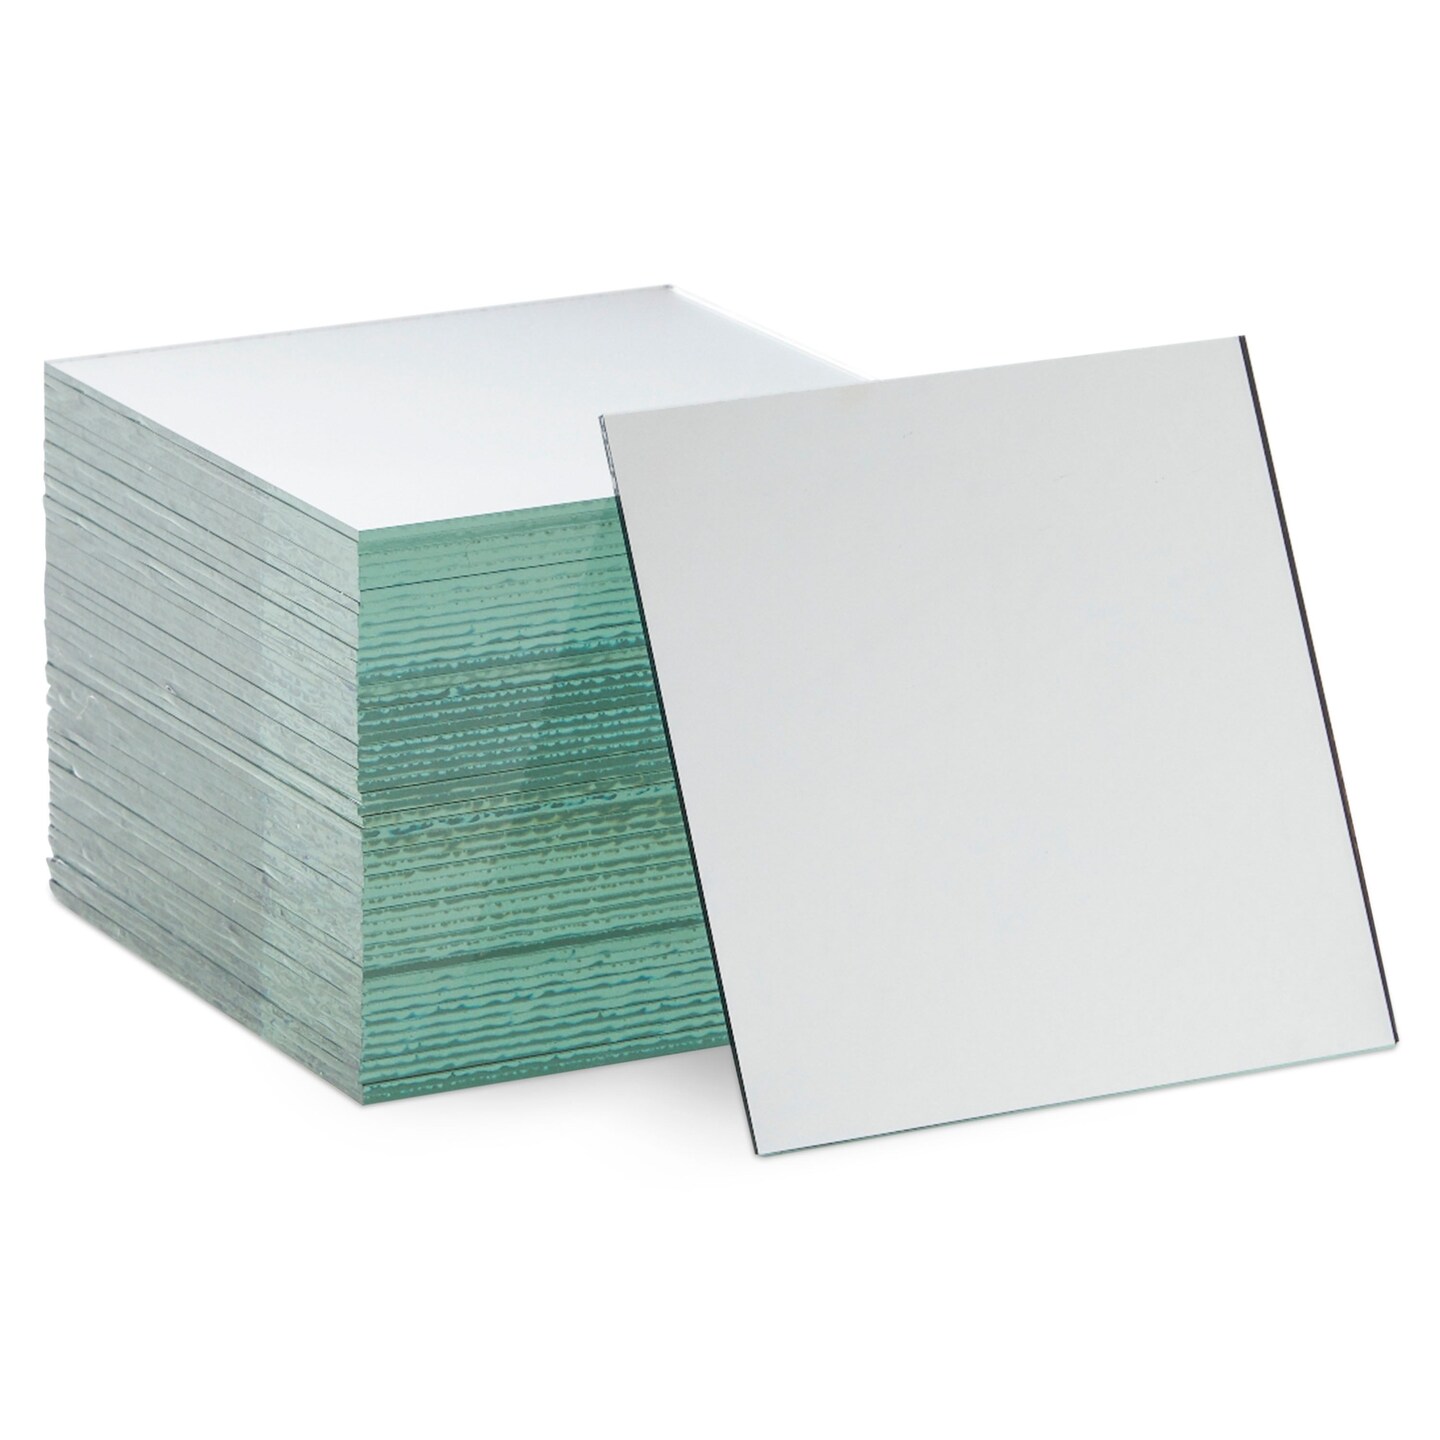 Suwimut 50 Pack Square Glass Mirror Tiles, 4x4 Inch Small Square